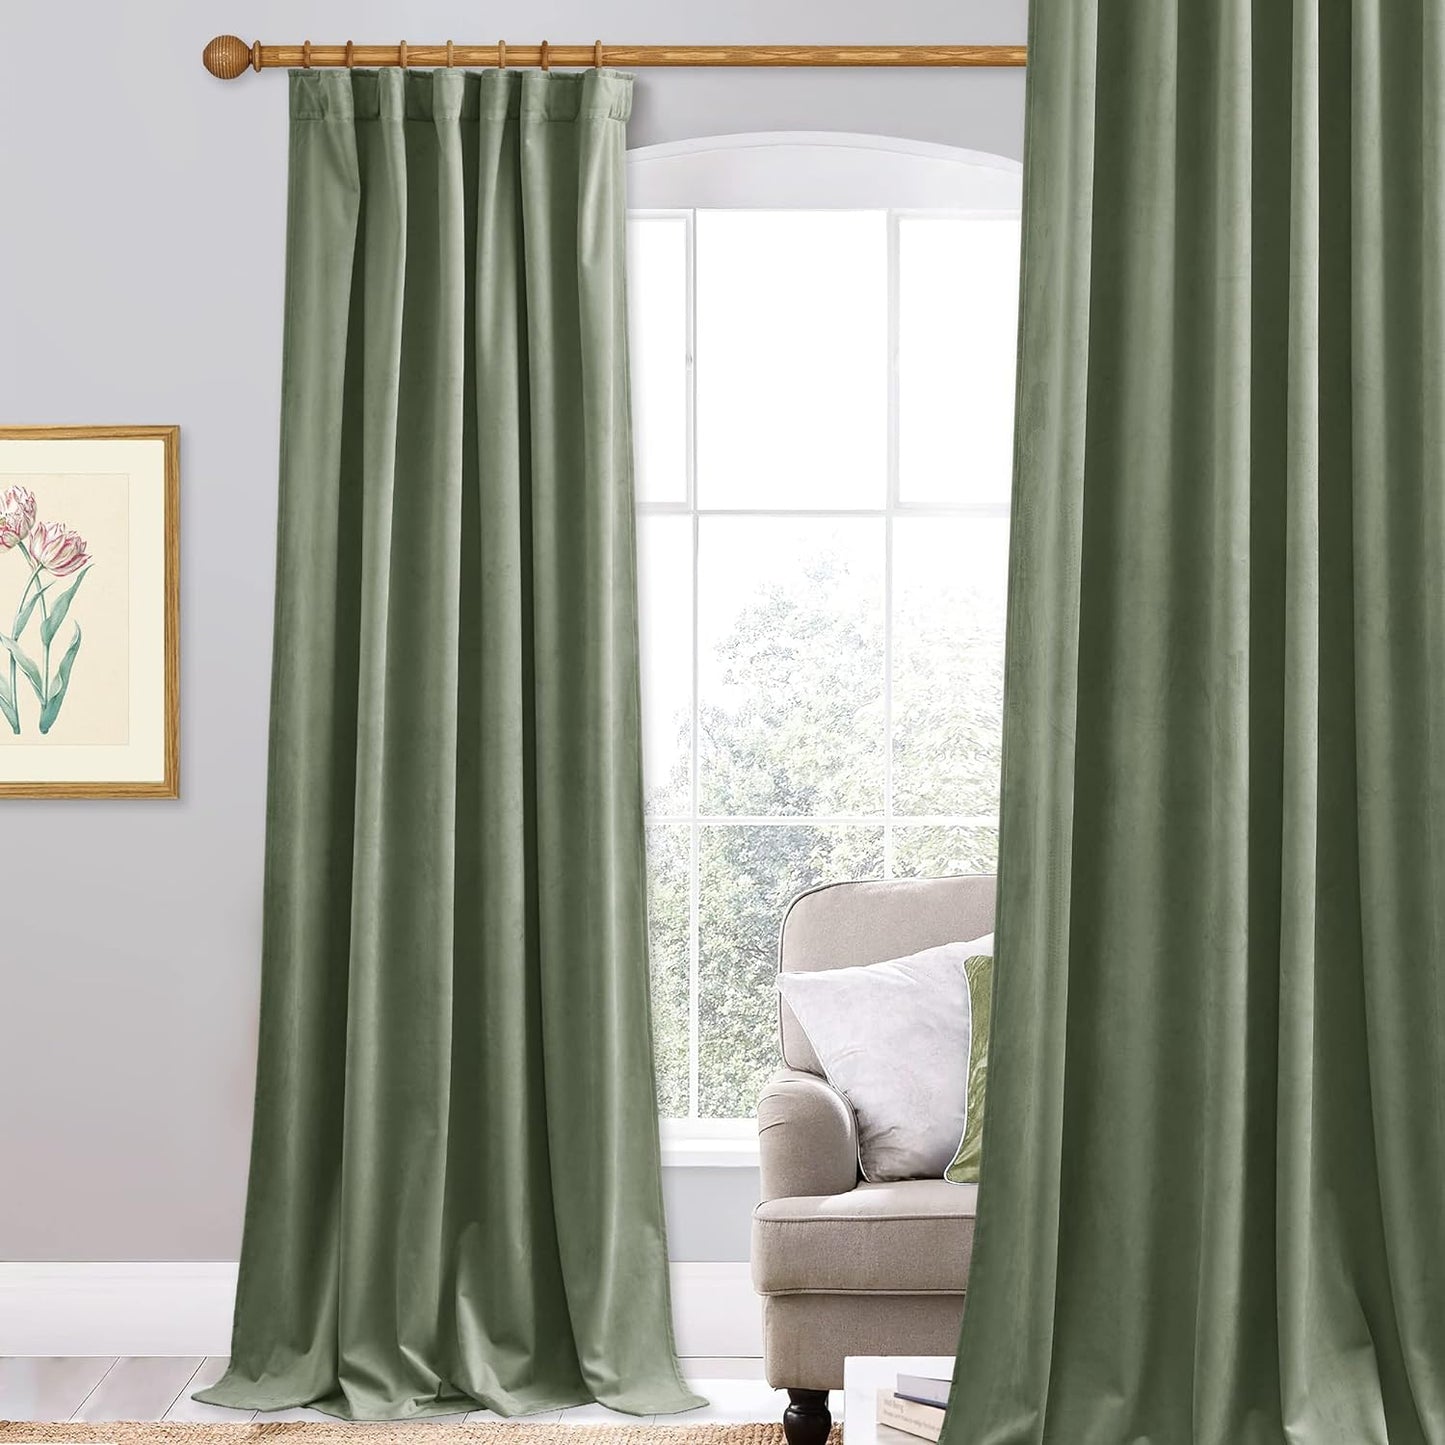 Stangh Navy Blue Velvet Curtains 96 Inches Long for Living Room, Luxury Blackout Sliding Door Curtains Thermal Insulated Window Drapes for Bedroom, W52 X L96 Inches, 1 Panel  StangH Sage Green W62 X L96 